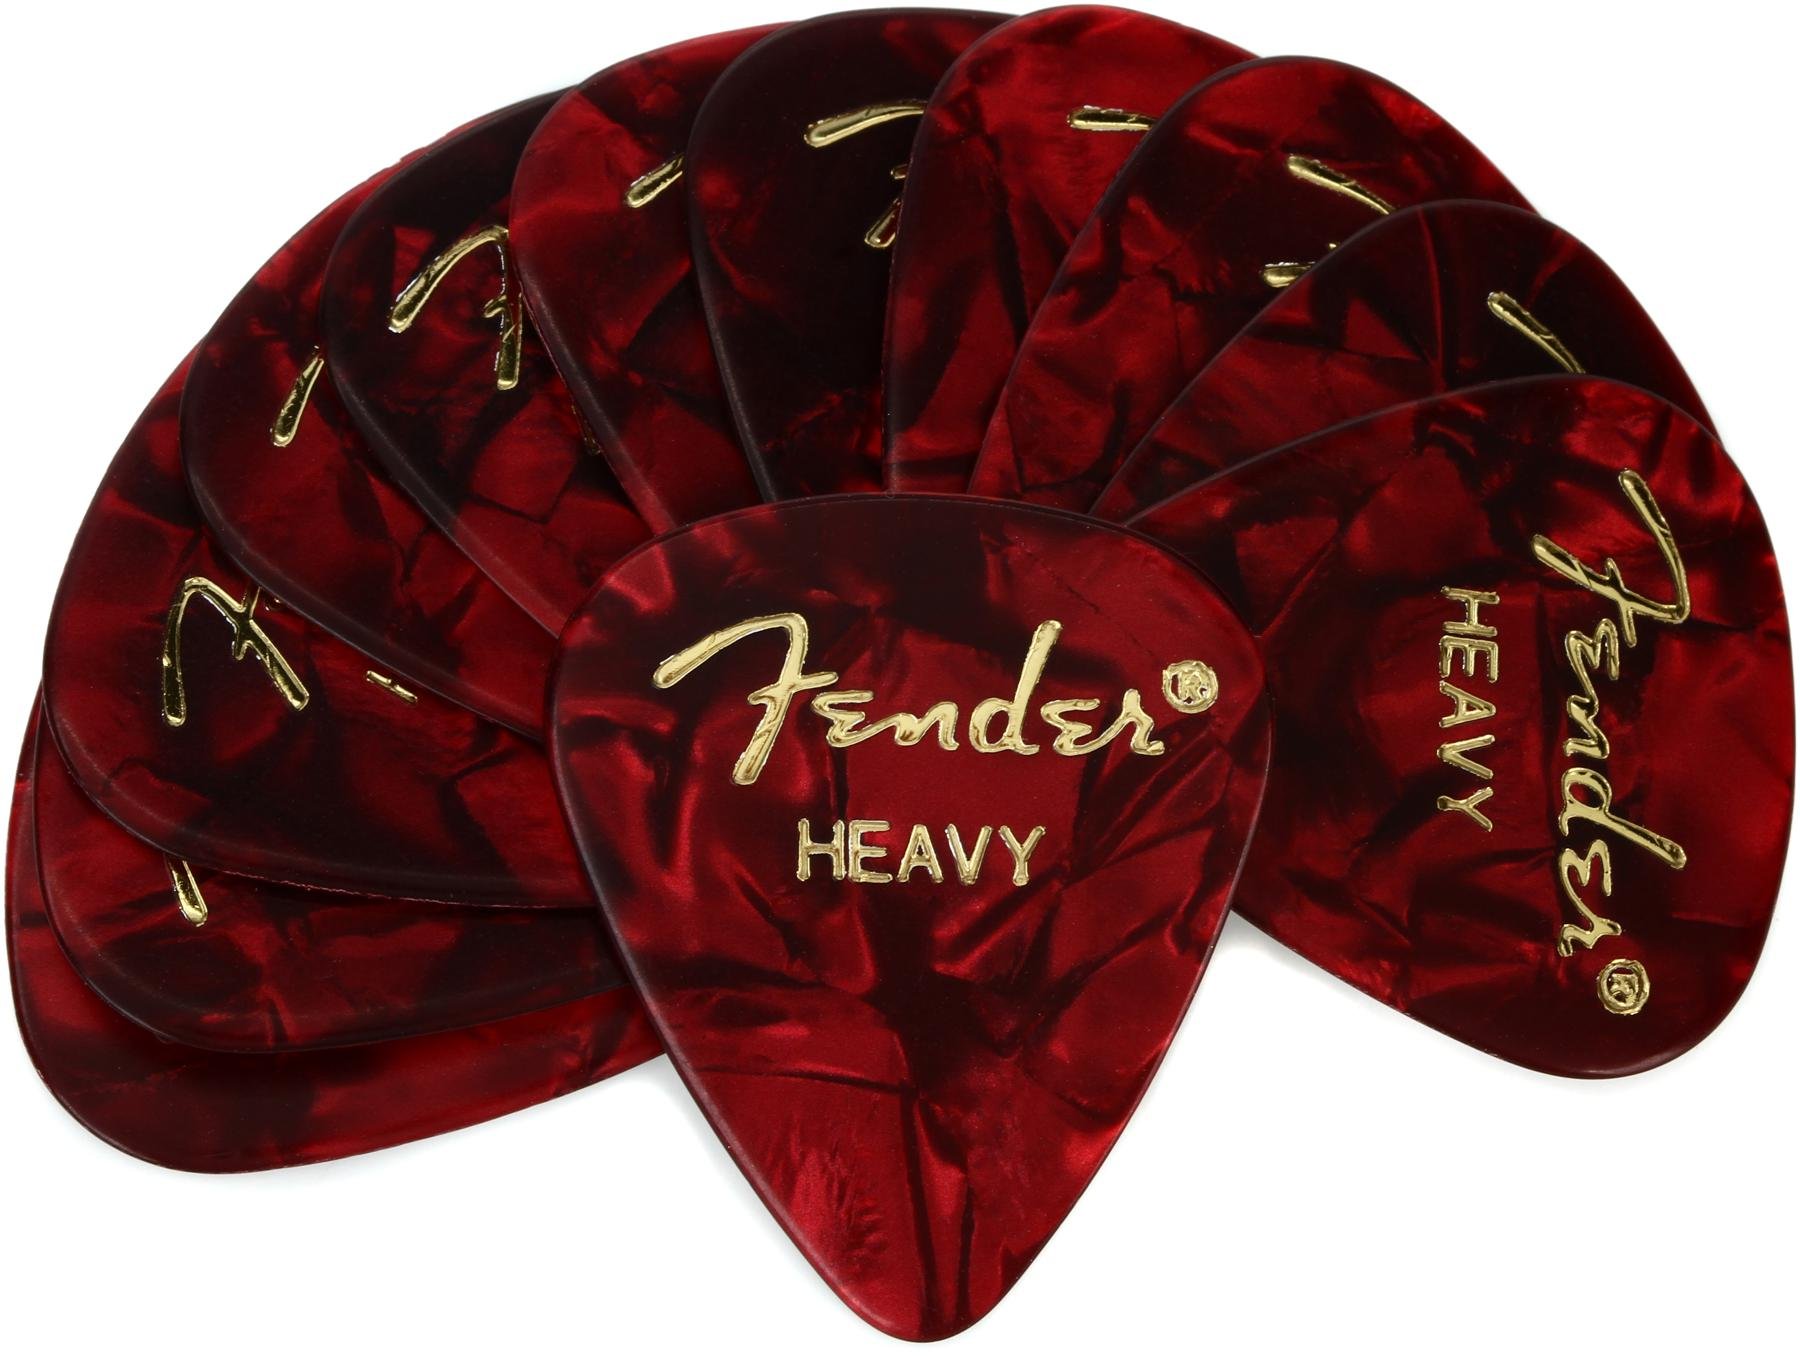 Fender 351 Shape Premium Celluloid Picks Heavy Red Moto 12 Pack Sweetwater